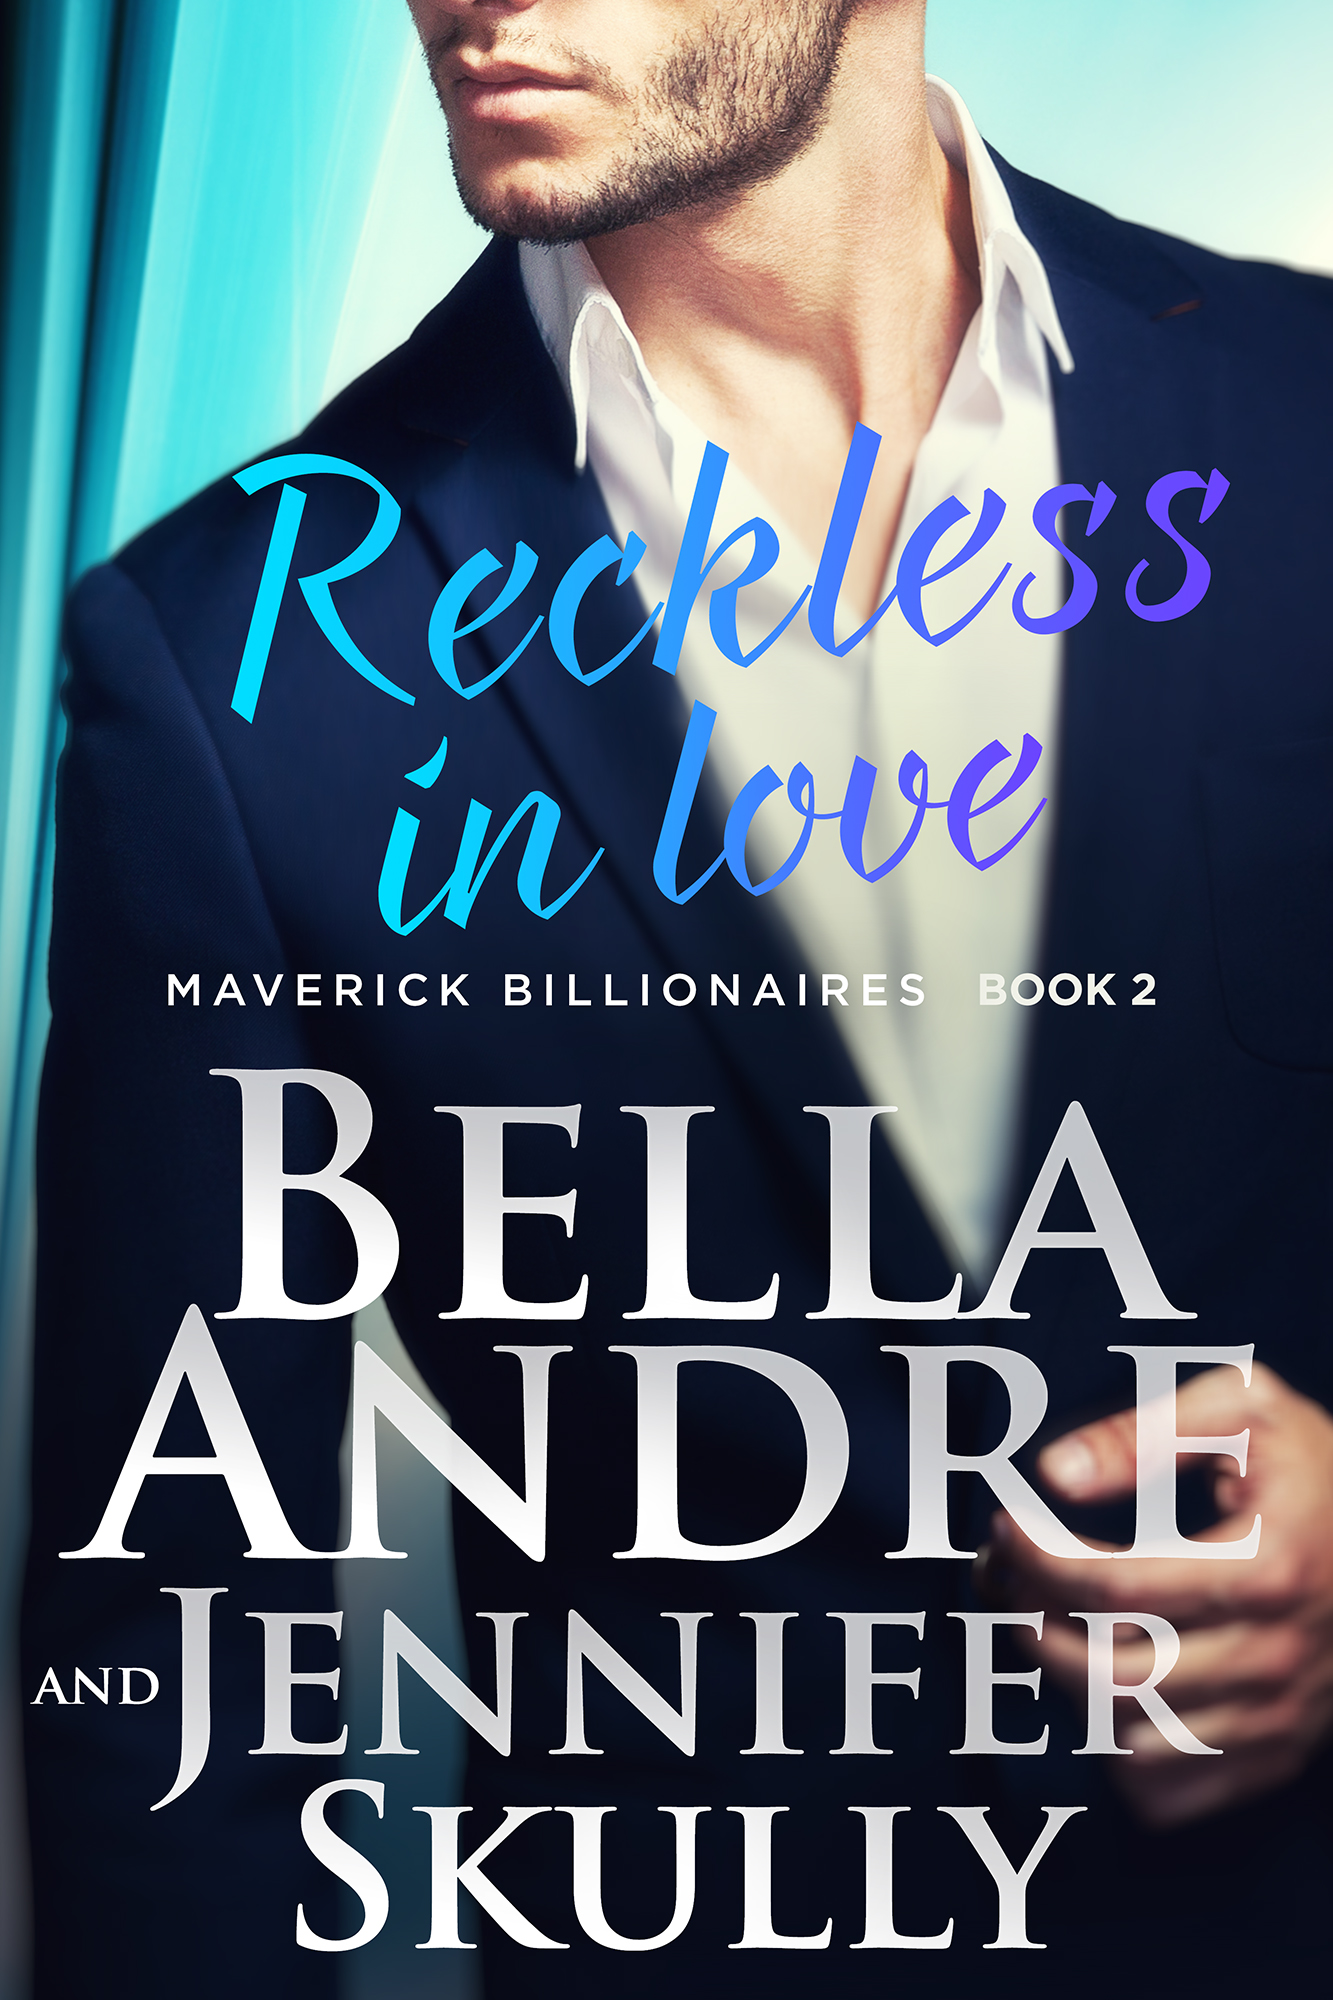 Cover of Reckless in Love - Maverick Billionaires Book 2 - by Bella Andre and Jennifer Skully